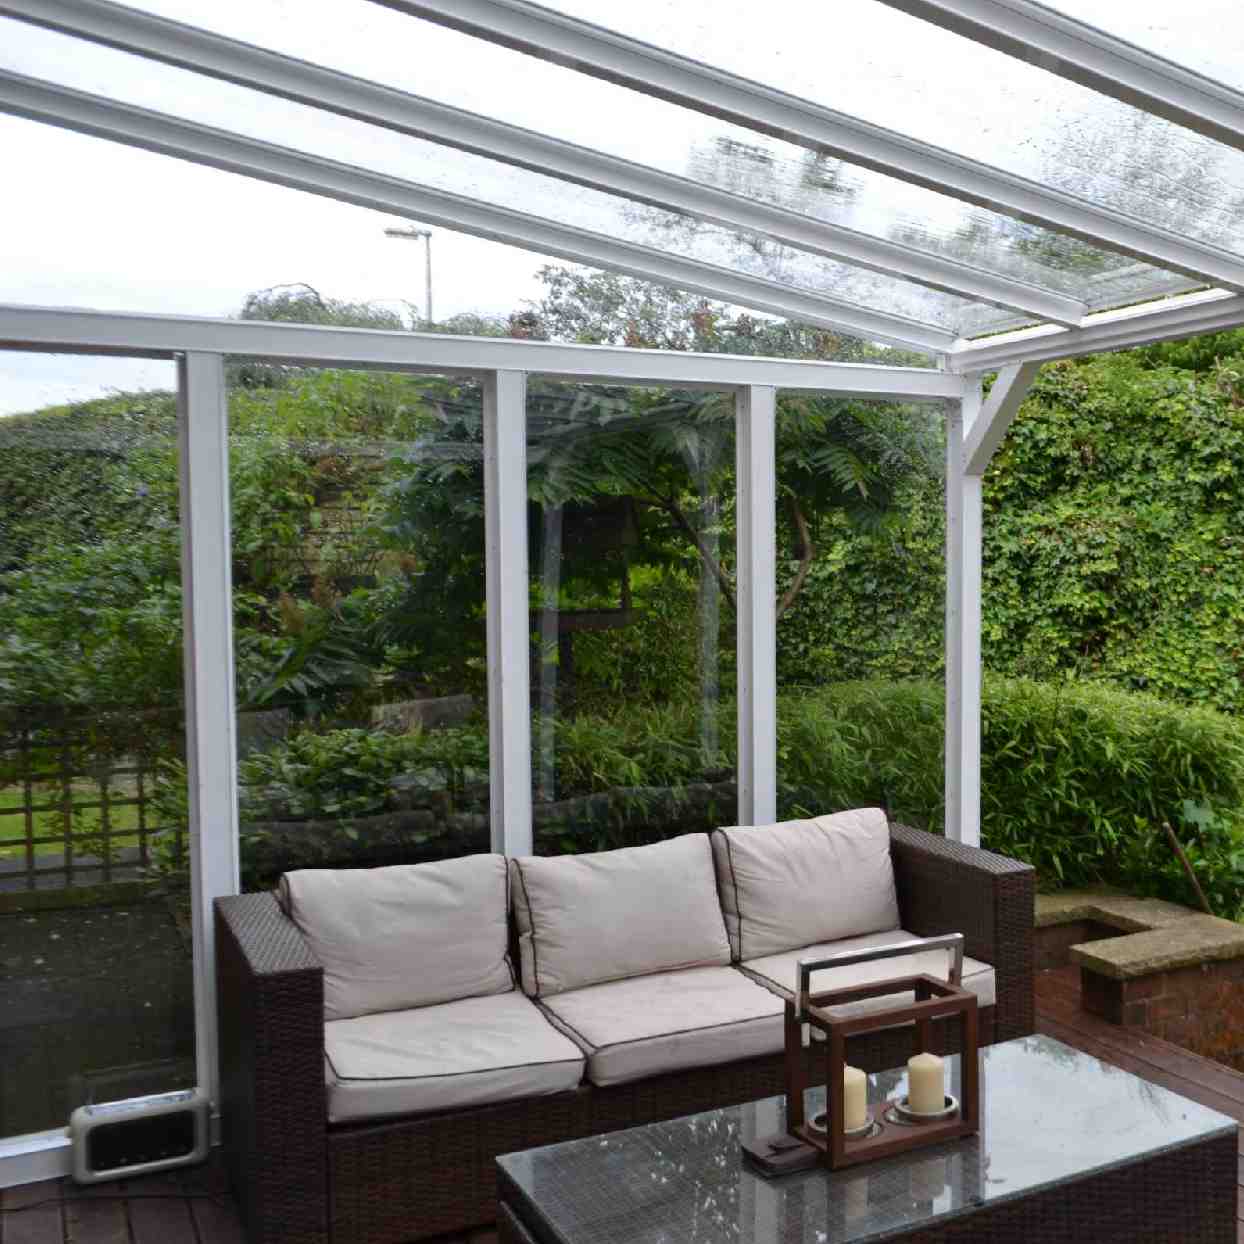 Buy Omega Verandah White with 16mm Polycarbonate Glazing - 10.6m (W) x 3.5m (P), (5) Supporting Posts online today